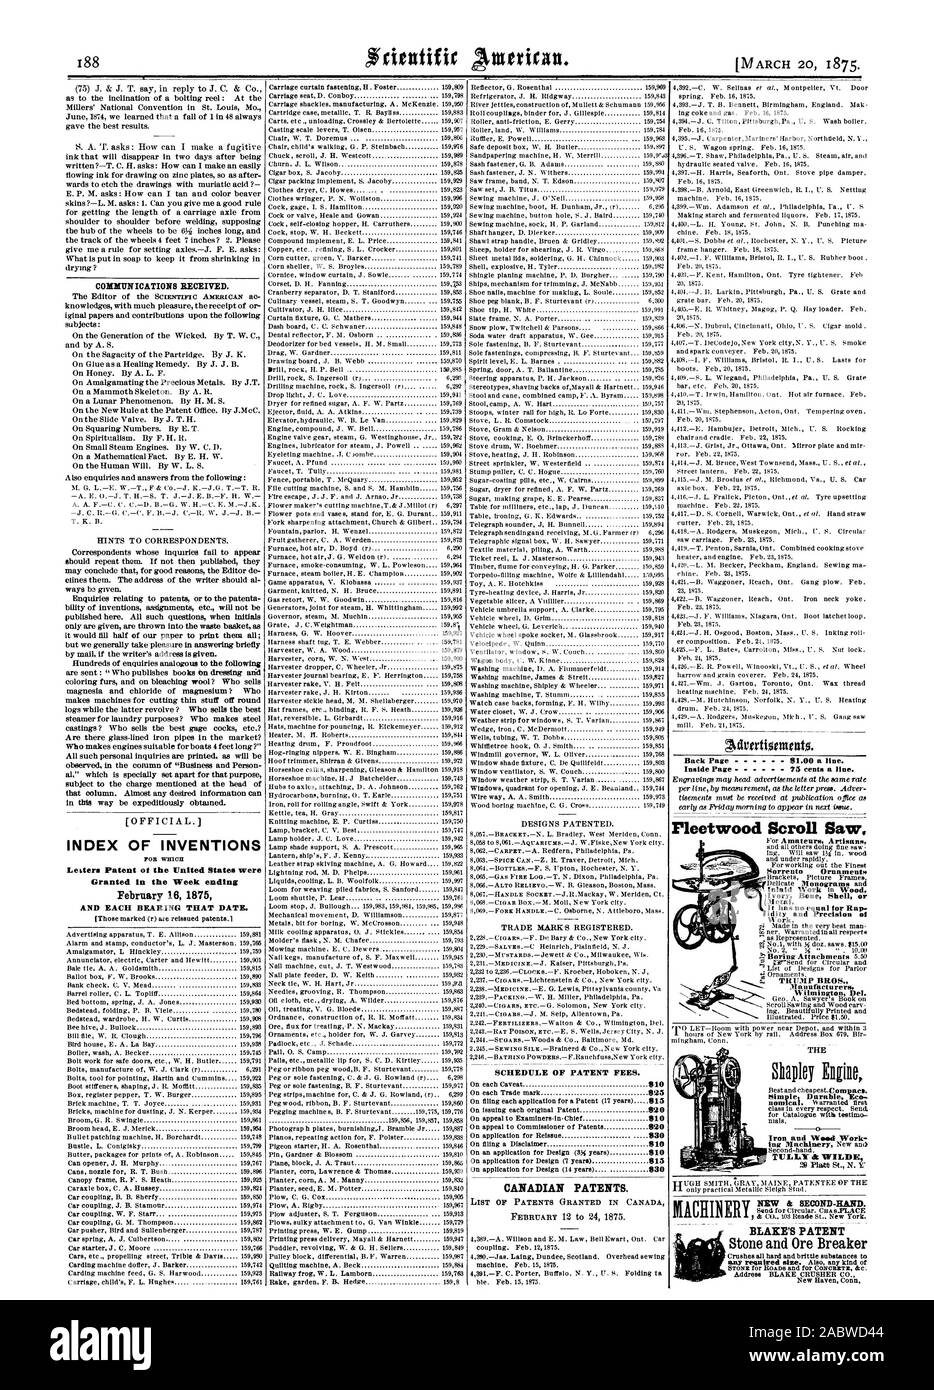 OFFICIAL. INDEX OF INVENTIONS Letters Patent ot the United States were Granted in the Week ending February 16 1875 AND EACH BEARING THAT DATE. TRADE MARKS REGISTERED. SCHEDULE OF PATENT FEES. CANADIAN PATENTS. LIST OF PATENTS GRANTED IN CANADA Back Page  91.00 a line. Inside Page 75 cents a line. Fleetwood Scroll Saw. Shapley kink BLAKE'S PATENT Sorrento Ornaments Bone Shell or Metal. It has no equal for Rap idity and Precision ot Work. THUMP BROS. Manufacturers Wilmington Del., scientific american, 1875-03-20 Stock Photo